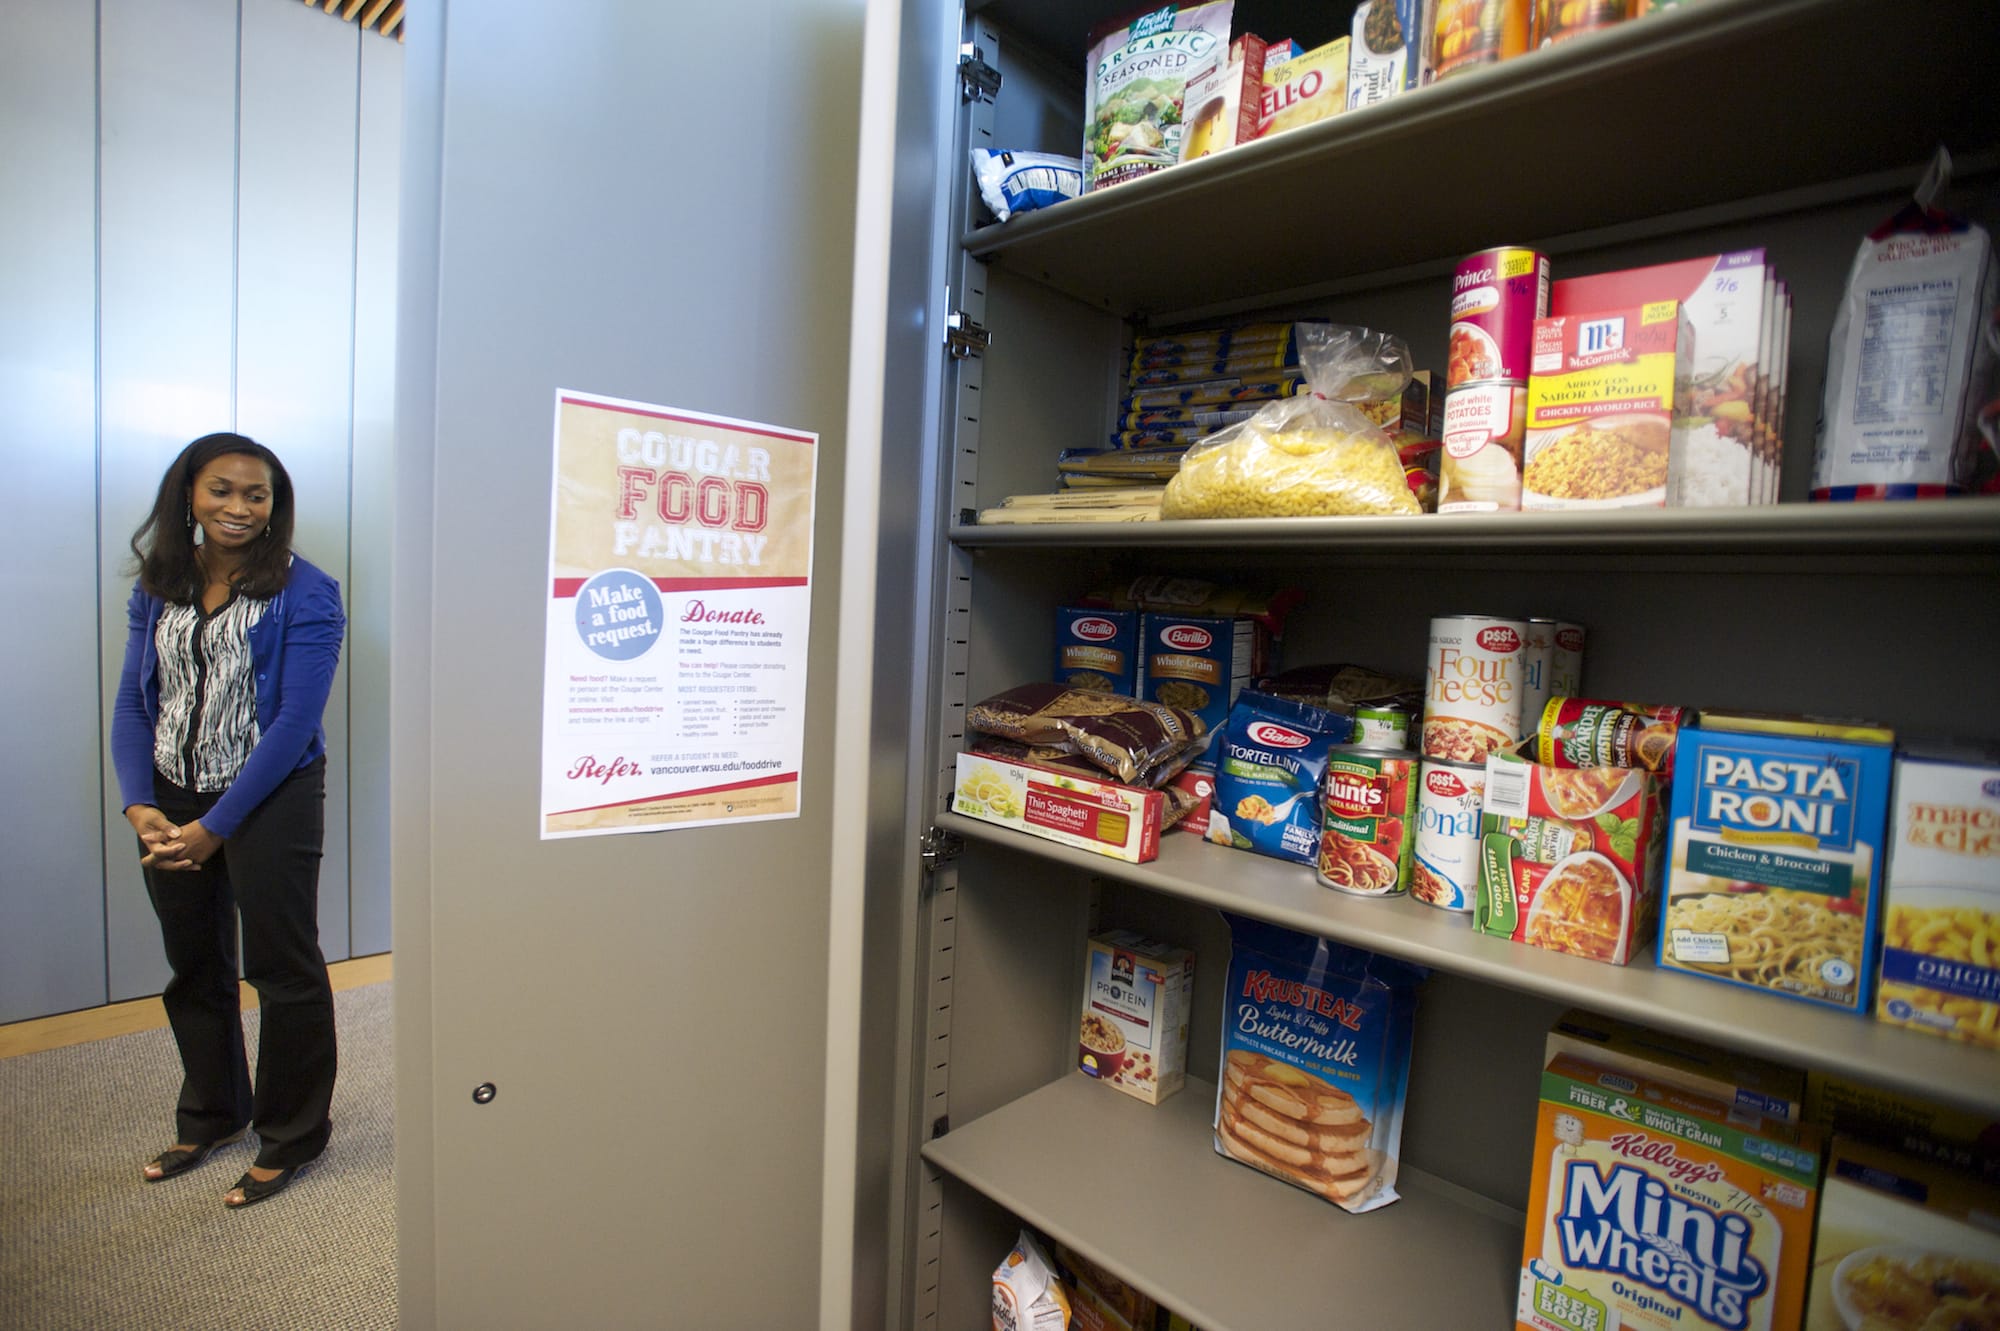 Kafiat Beckley, supervisor of the campus Cougar Center at Washington State University Vancouver, shows off the Cougar Food Pantry. She said the pantry got going when a financial aid system glitch in 2012 revealed just how needy some students were.